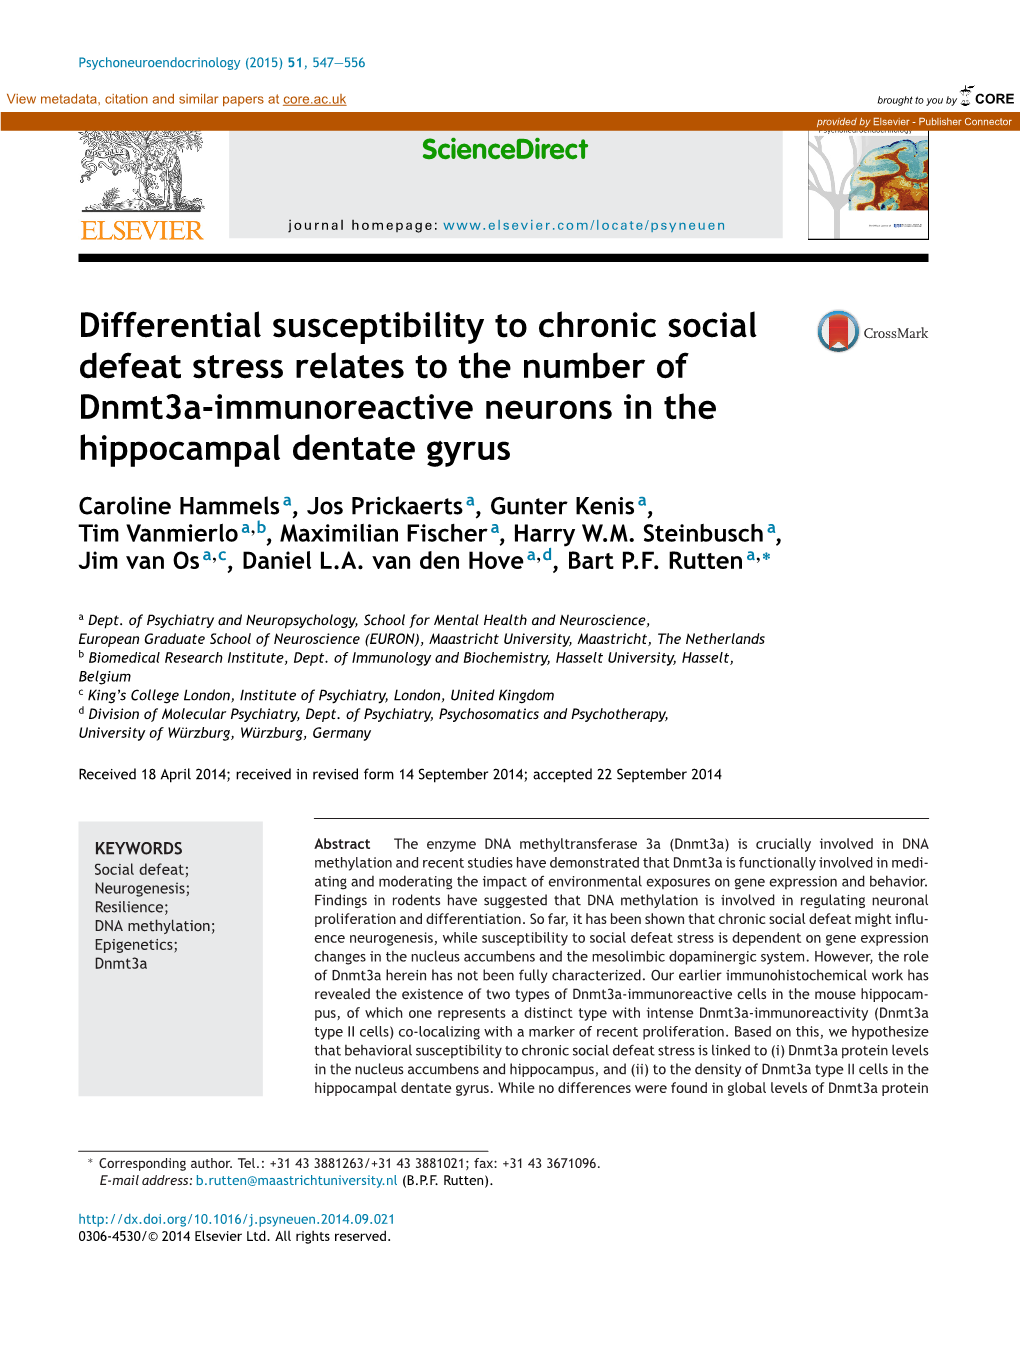 Differential Susceptibility to Chronic Social Defeat Stress Relates